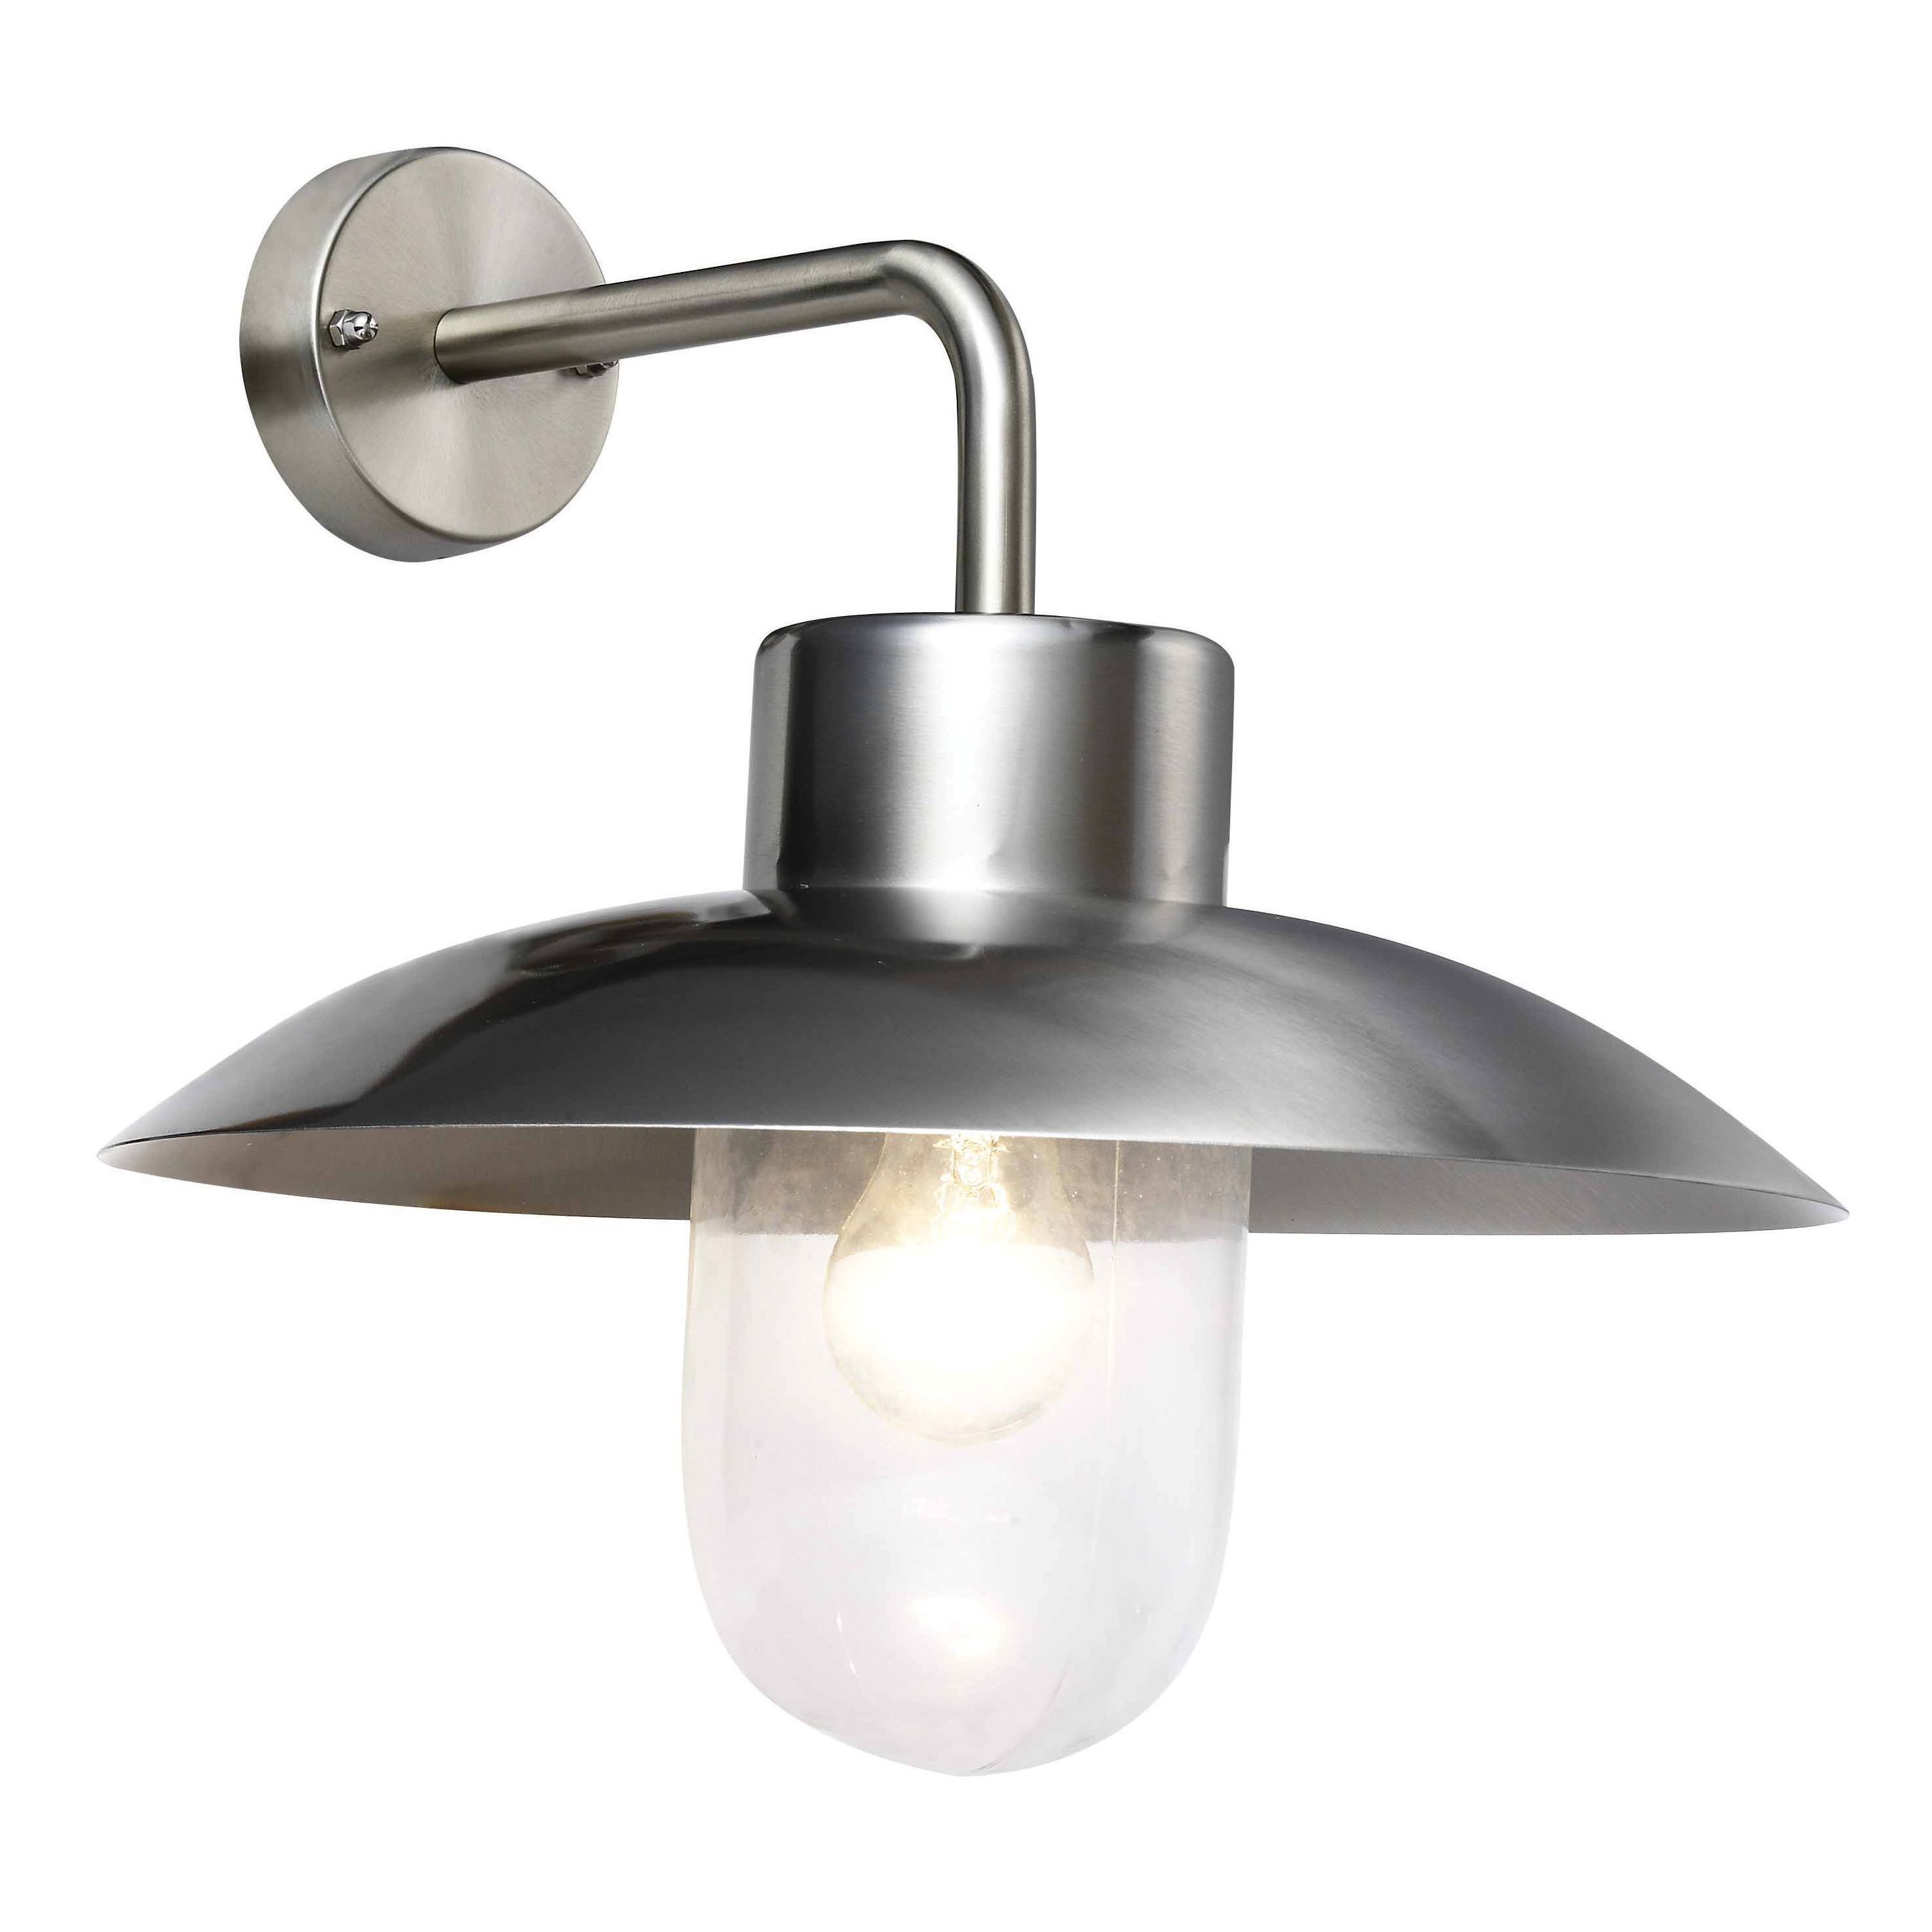 Blooma Mara External Wall Light | Departments | Diy At B&q £20 Within Chrome Outdoor Wall Lighting (View 13 of 15)